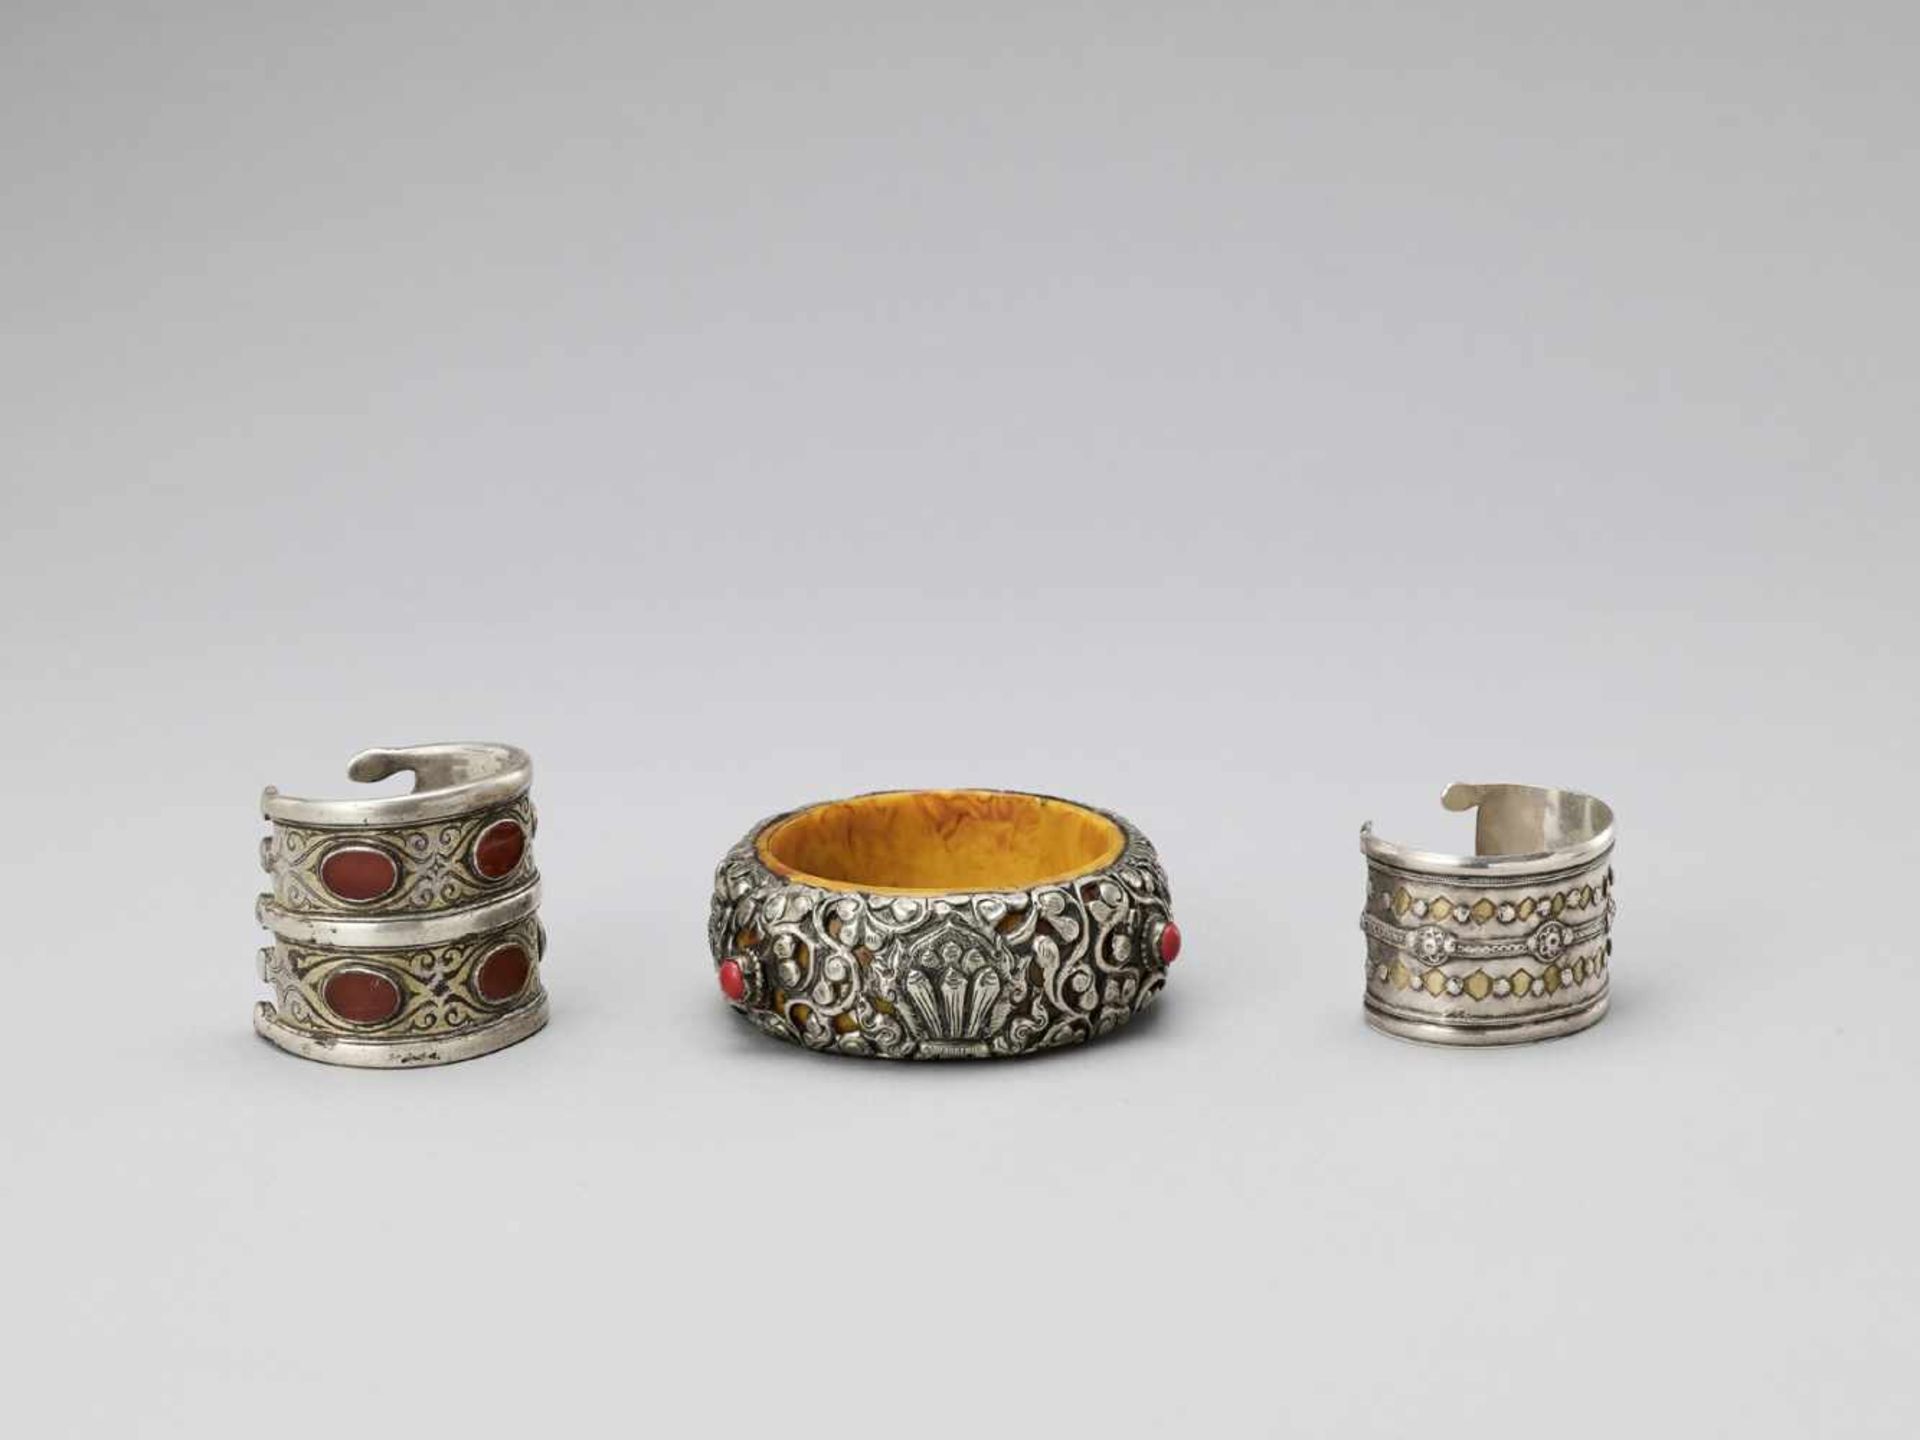 THREE PARCEL-GILT AND GEMSTONE-INLAID SILVER BANGLES, LATE 19TH TO EARLY 20TH CENTURY - Bild 3 aus 5